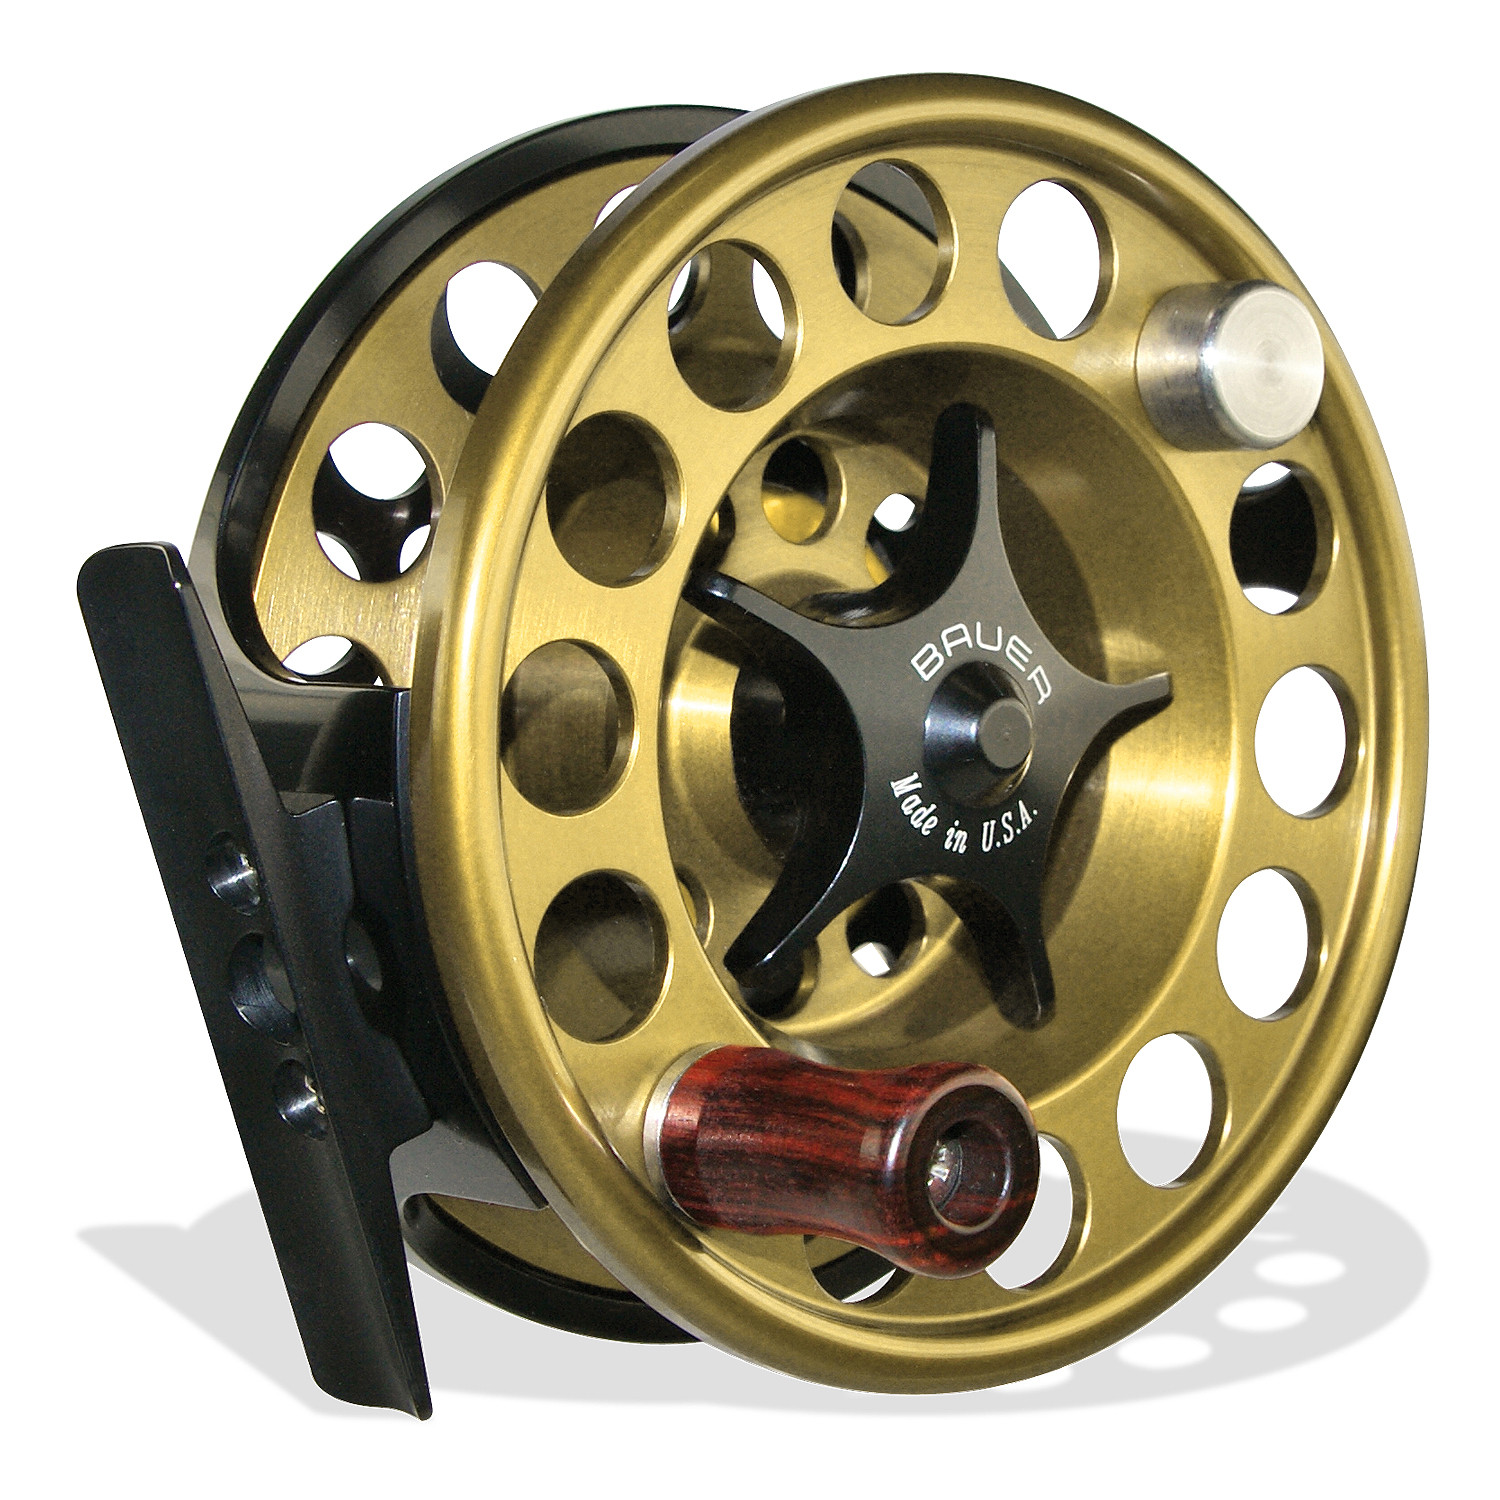 Bauer CFX Fly Fishing Reel Product Details